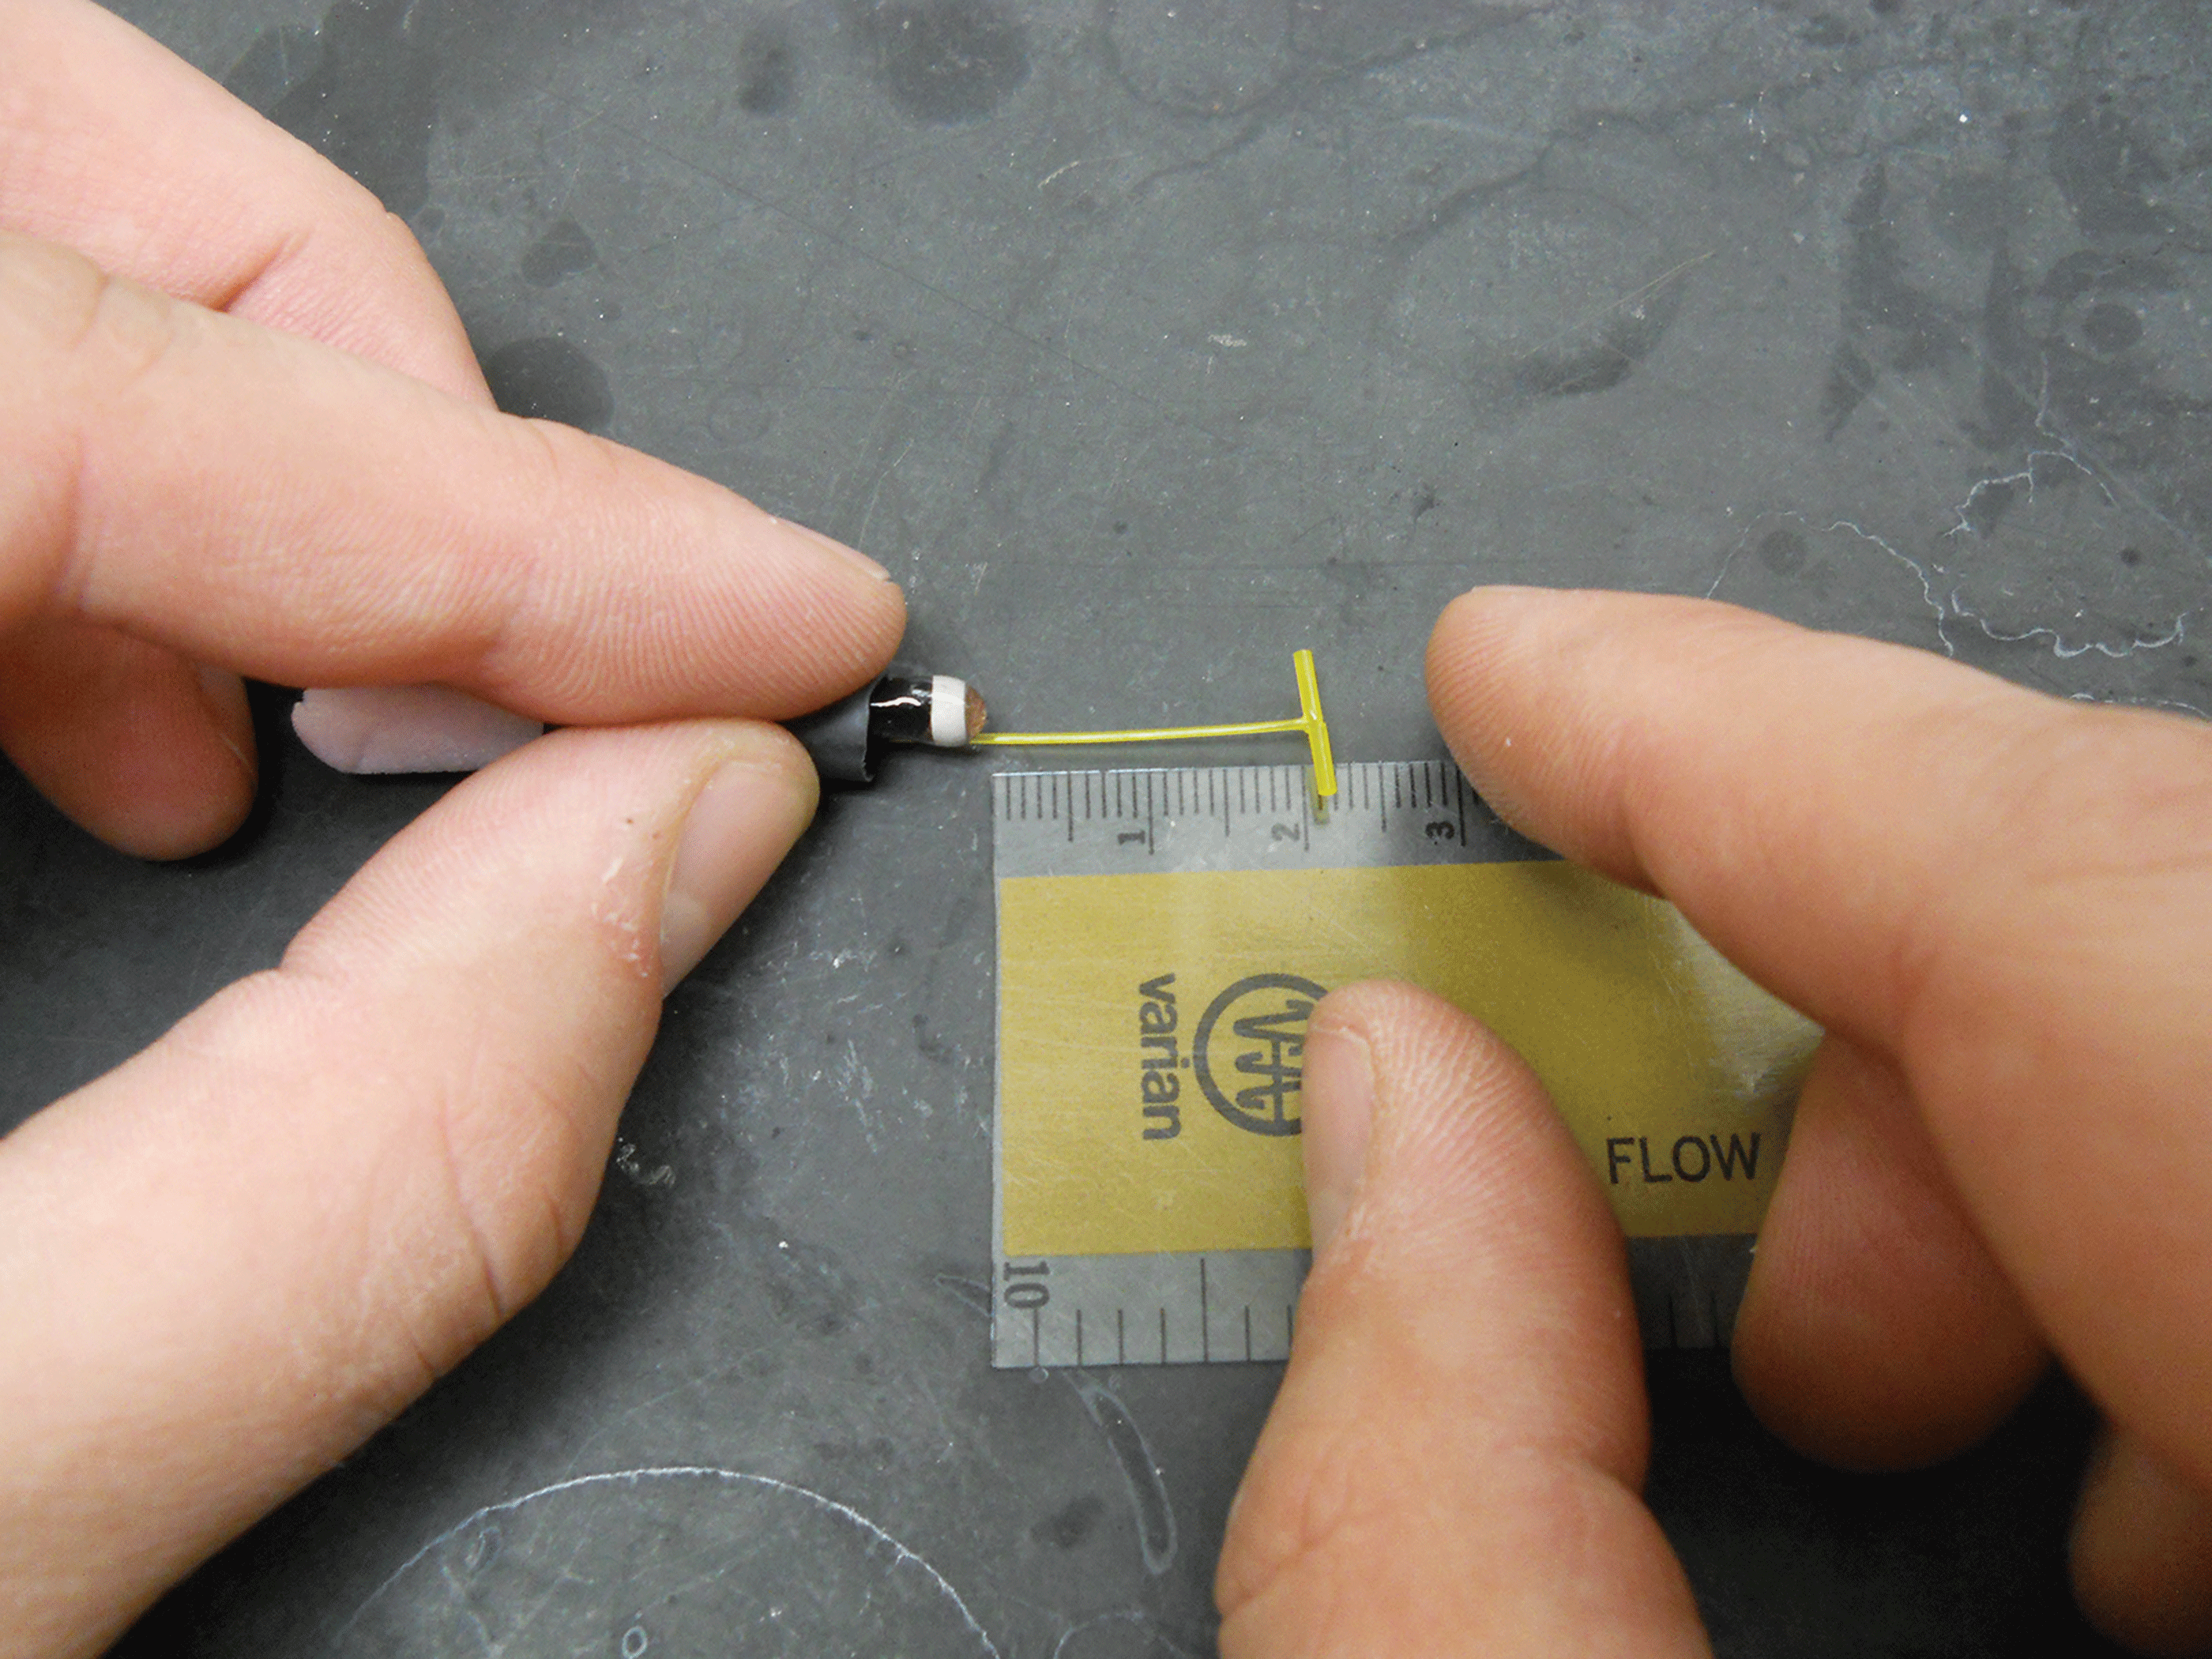 Photograph showing the T-bar end of the tag being pulled 20 millimeters from the end
                        of the shrink tubing.